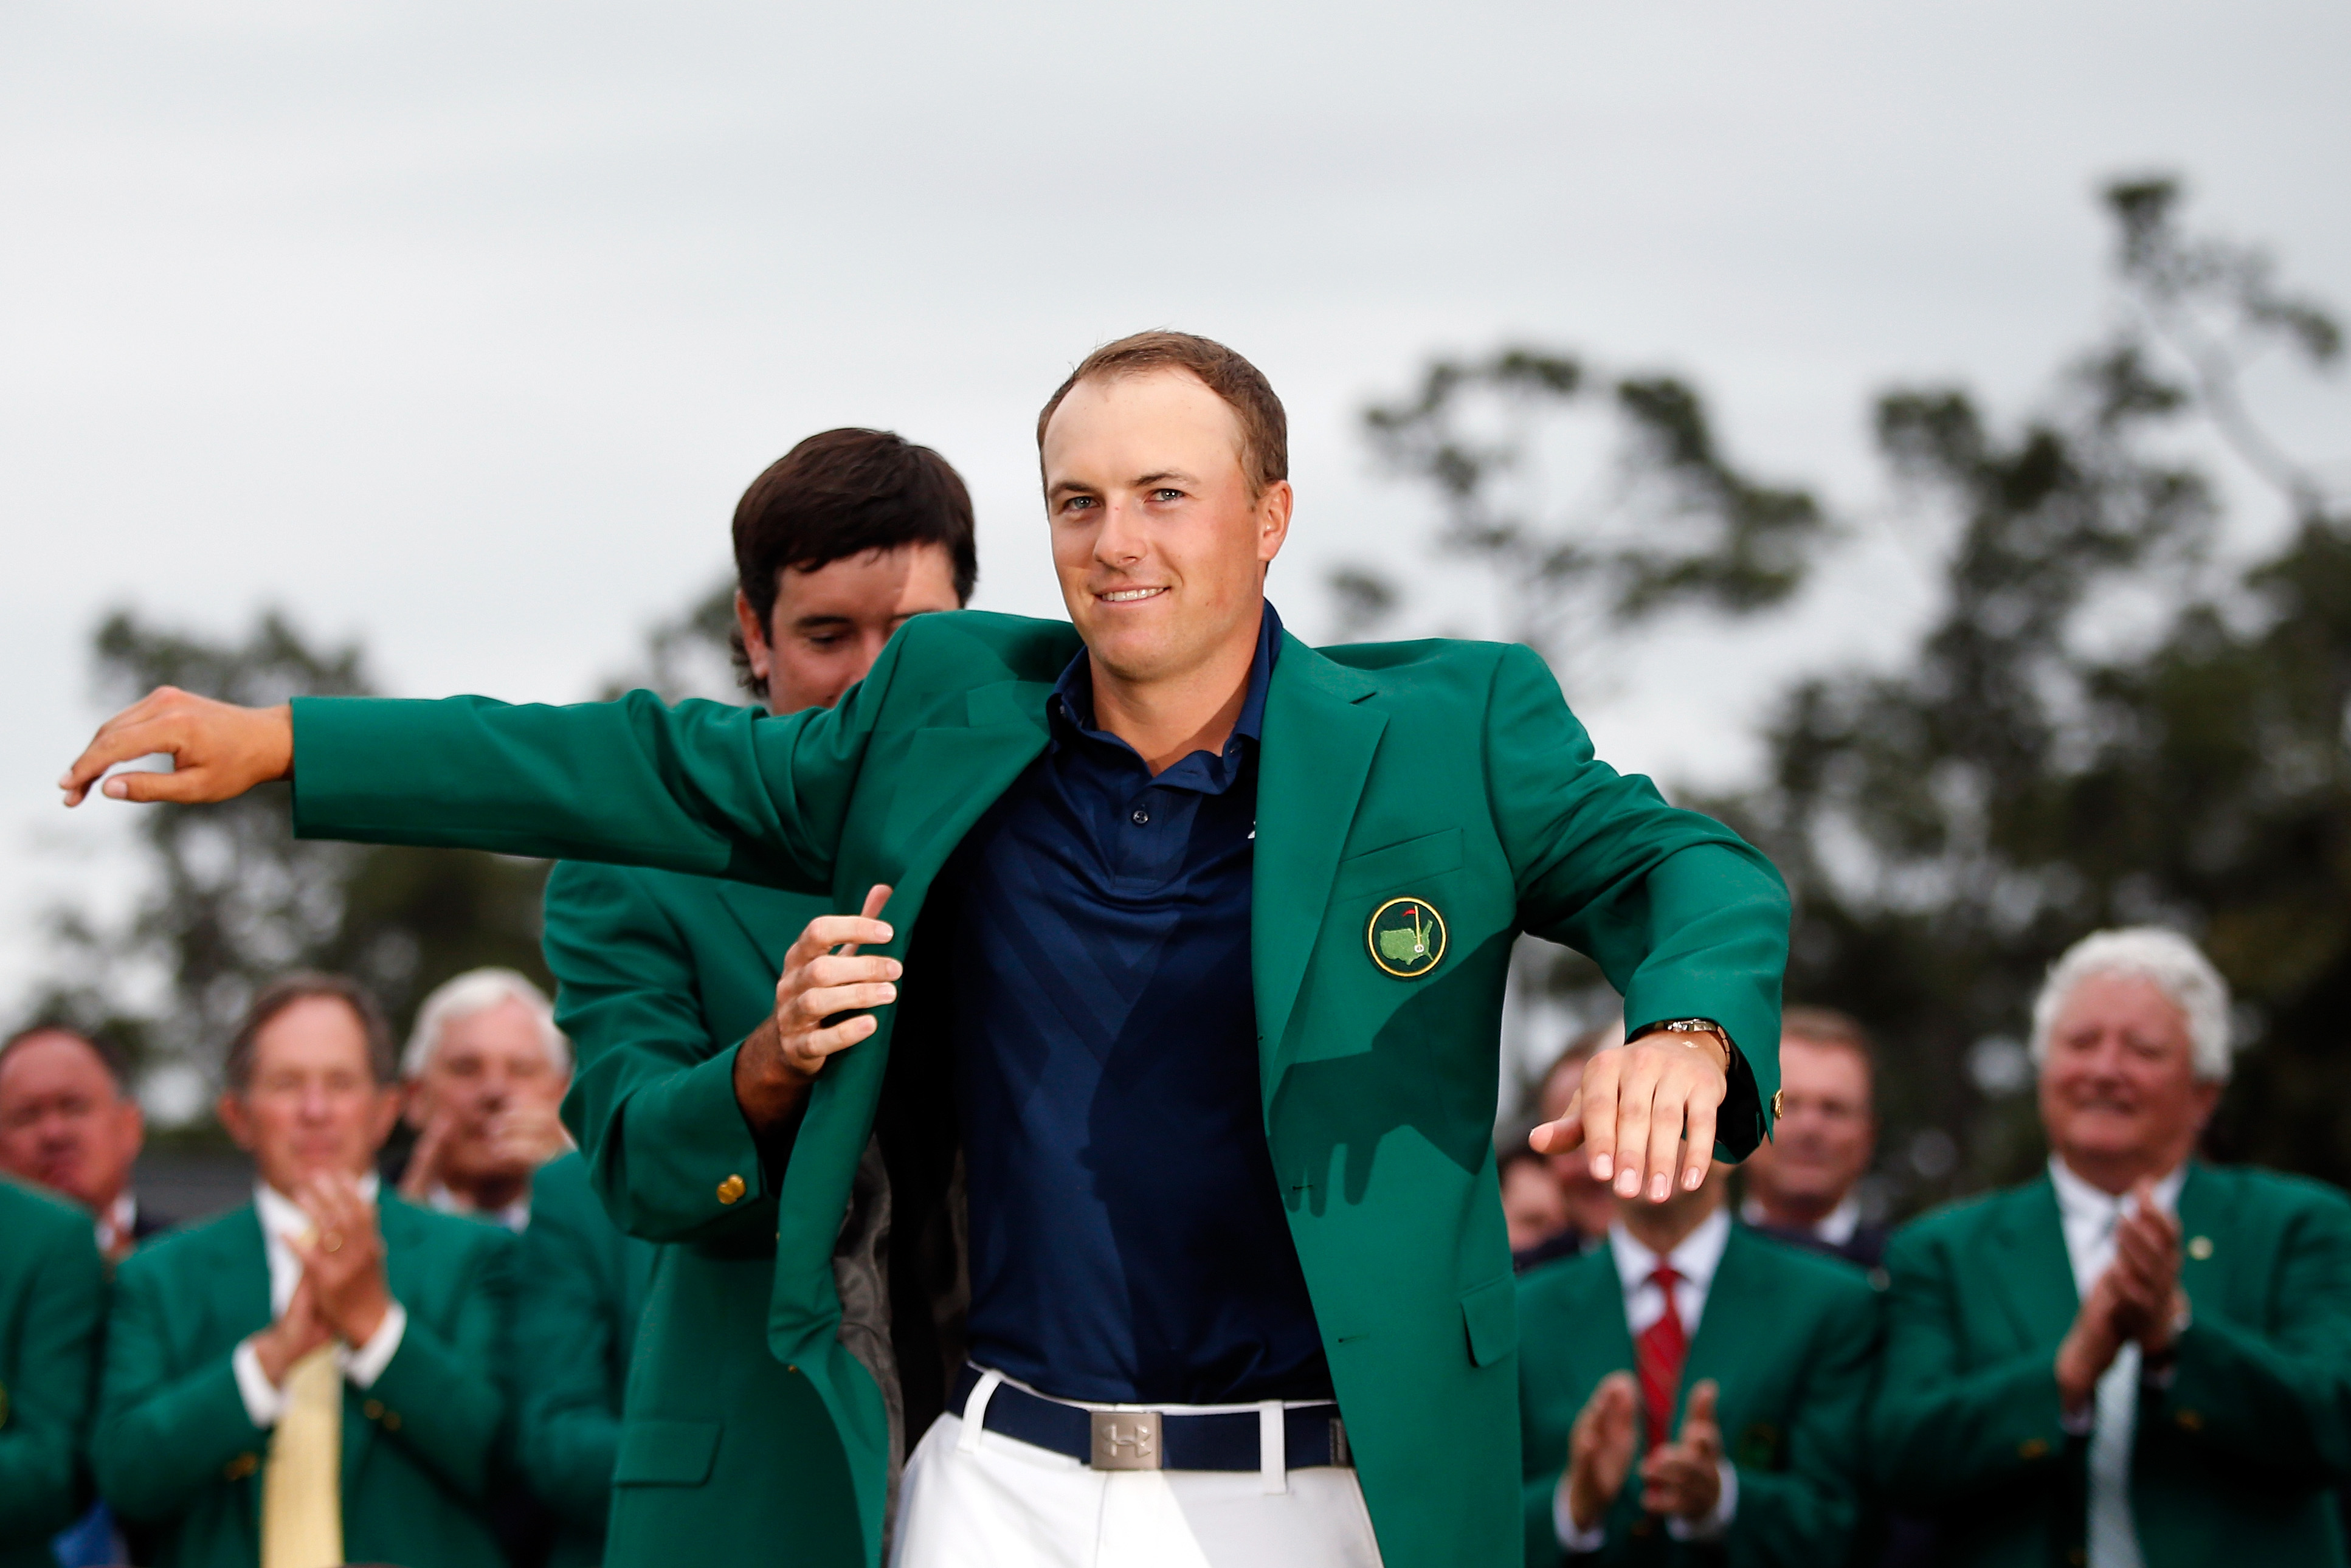 Bubba Watson presents Jordan Spieth of the United States with the green jacket after Spieth won the 2015 Masters Tournament at Augusta National Golf Club on April 12, 2015 in Augusta, Georgia. (Ezra Shaw&mdash;Getty Images)